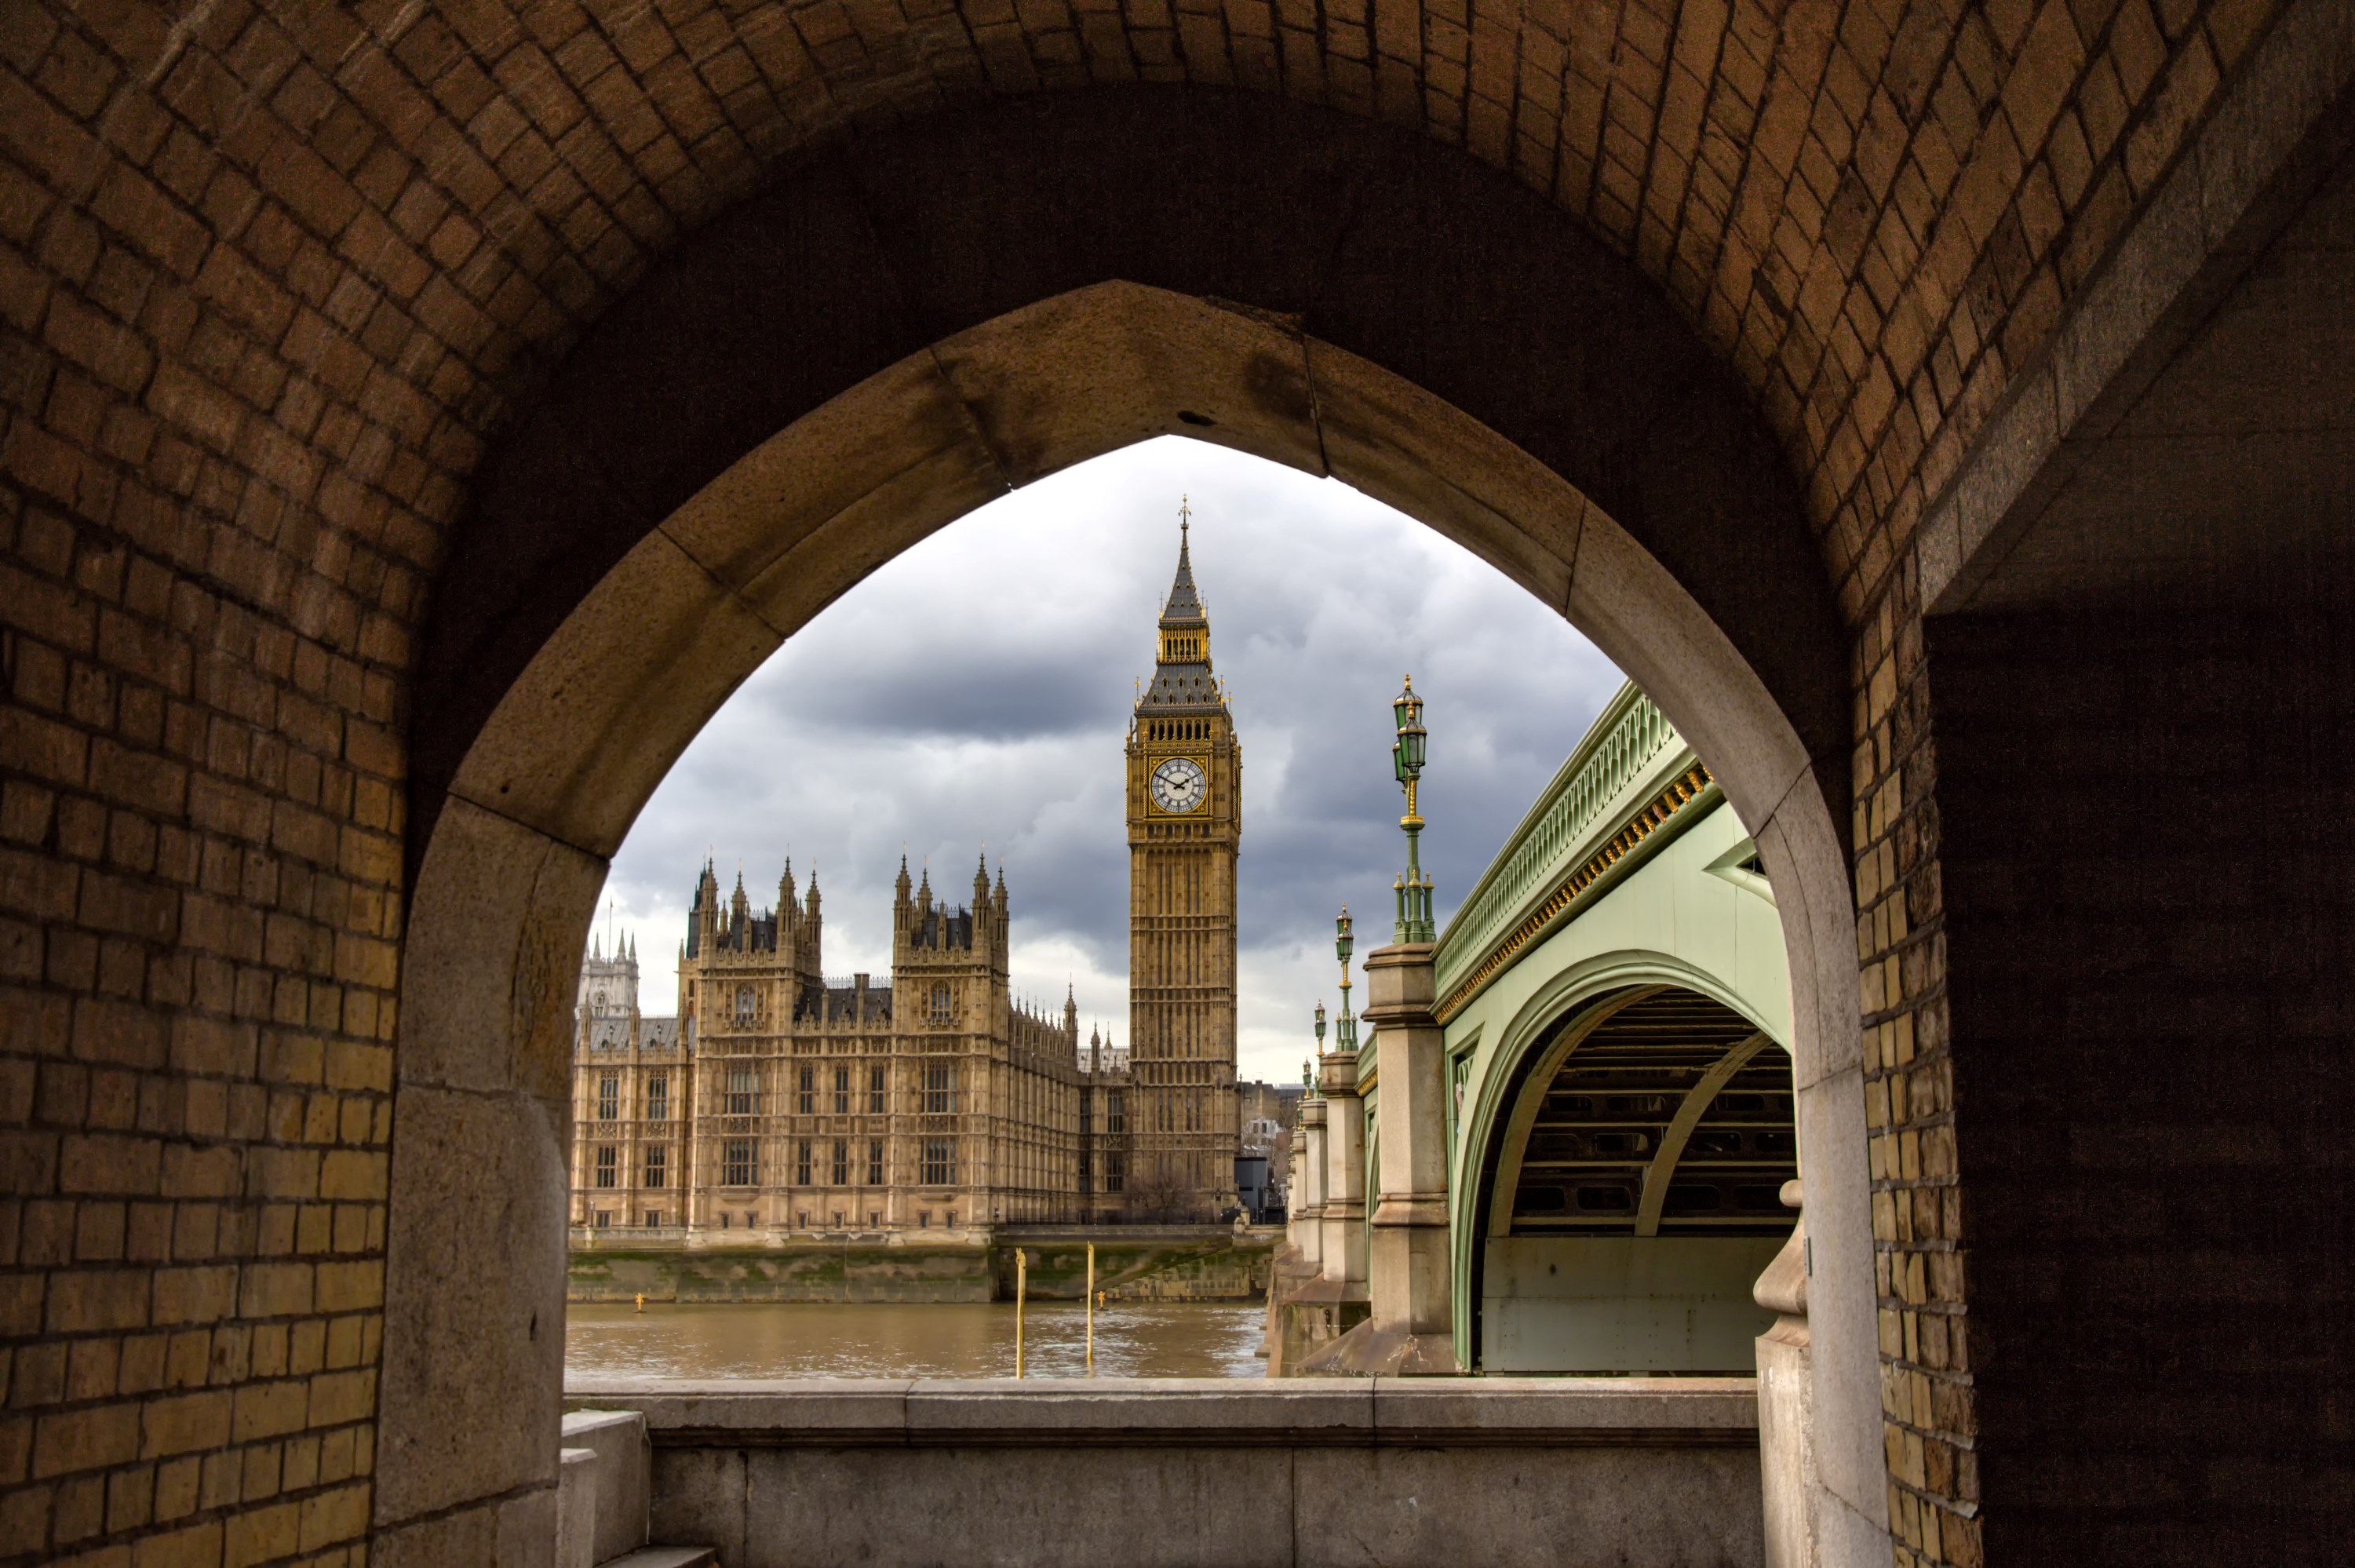 View of Parliament through an arch across the river